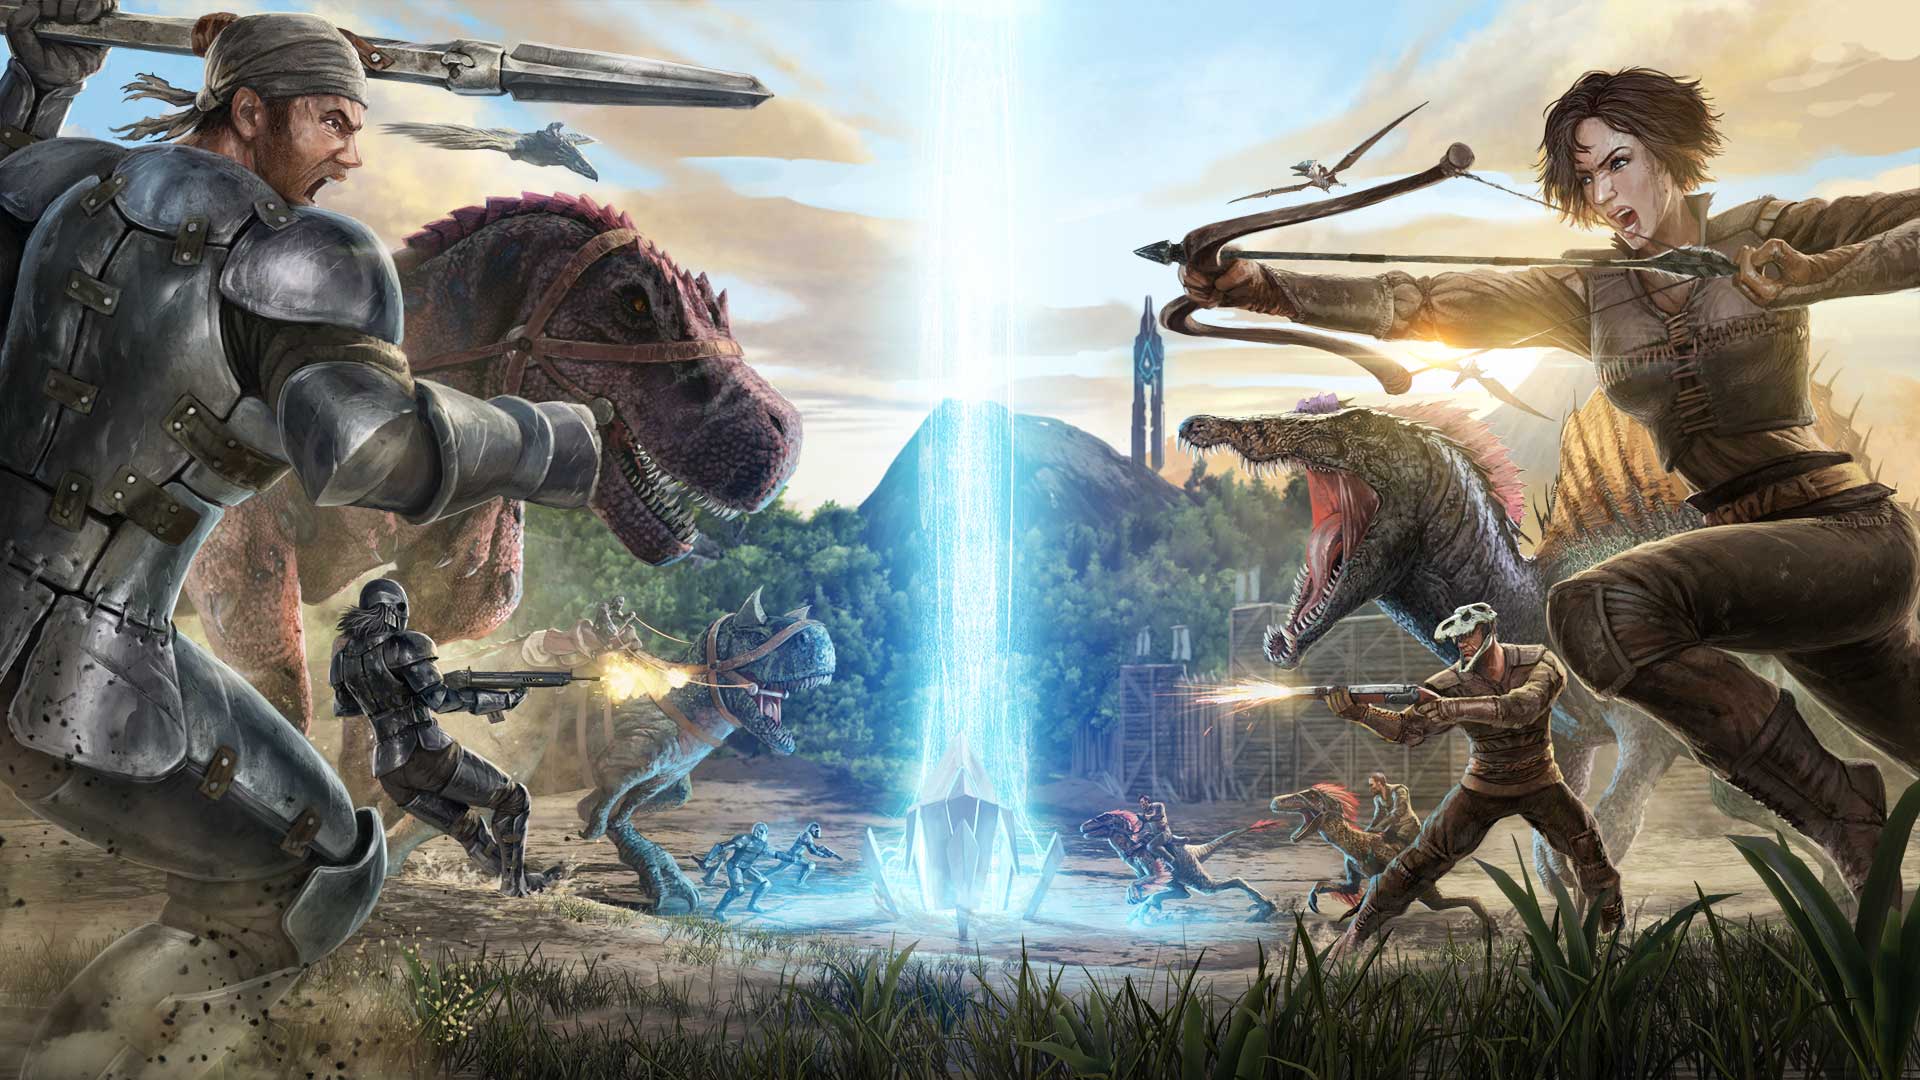 Jun 10 19 The Great Migration Ark Survival Evolved Complexminded The Great Migration As A Reminder Tomorrow We Are Removing Some Of Our Lower Population Legacy Ark Servers On Pc Xbox And Ps4 From Our Official Legacy Network These